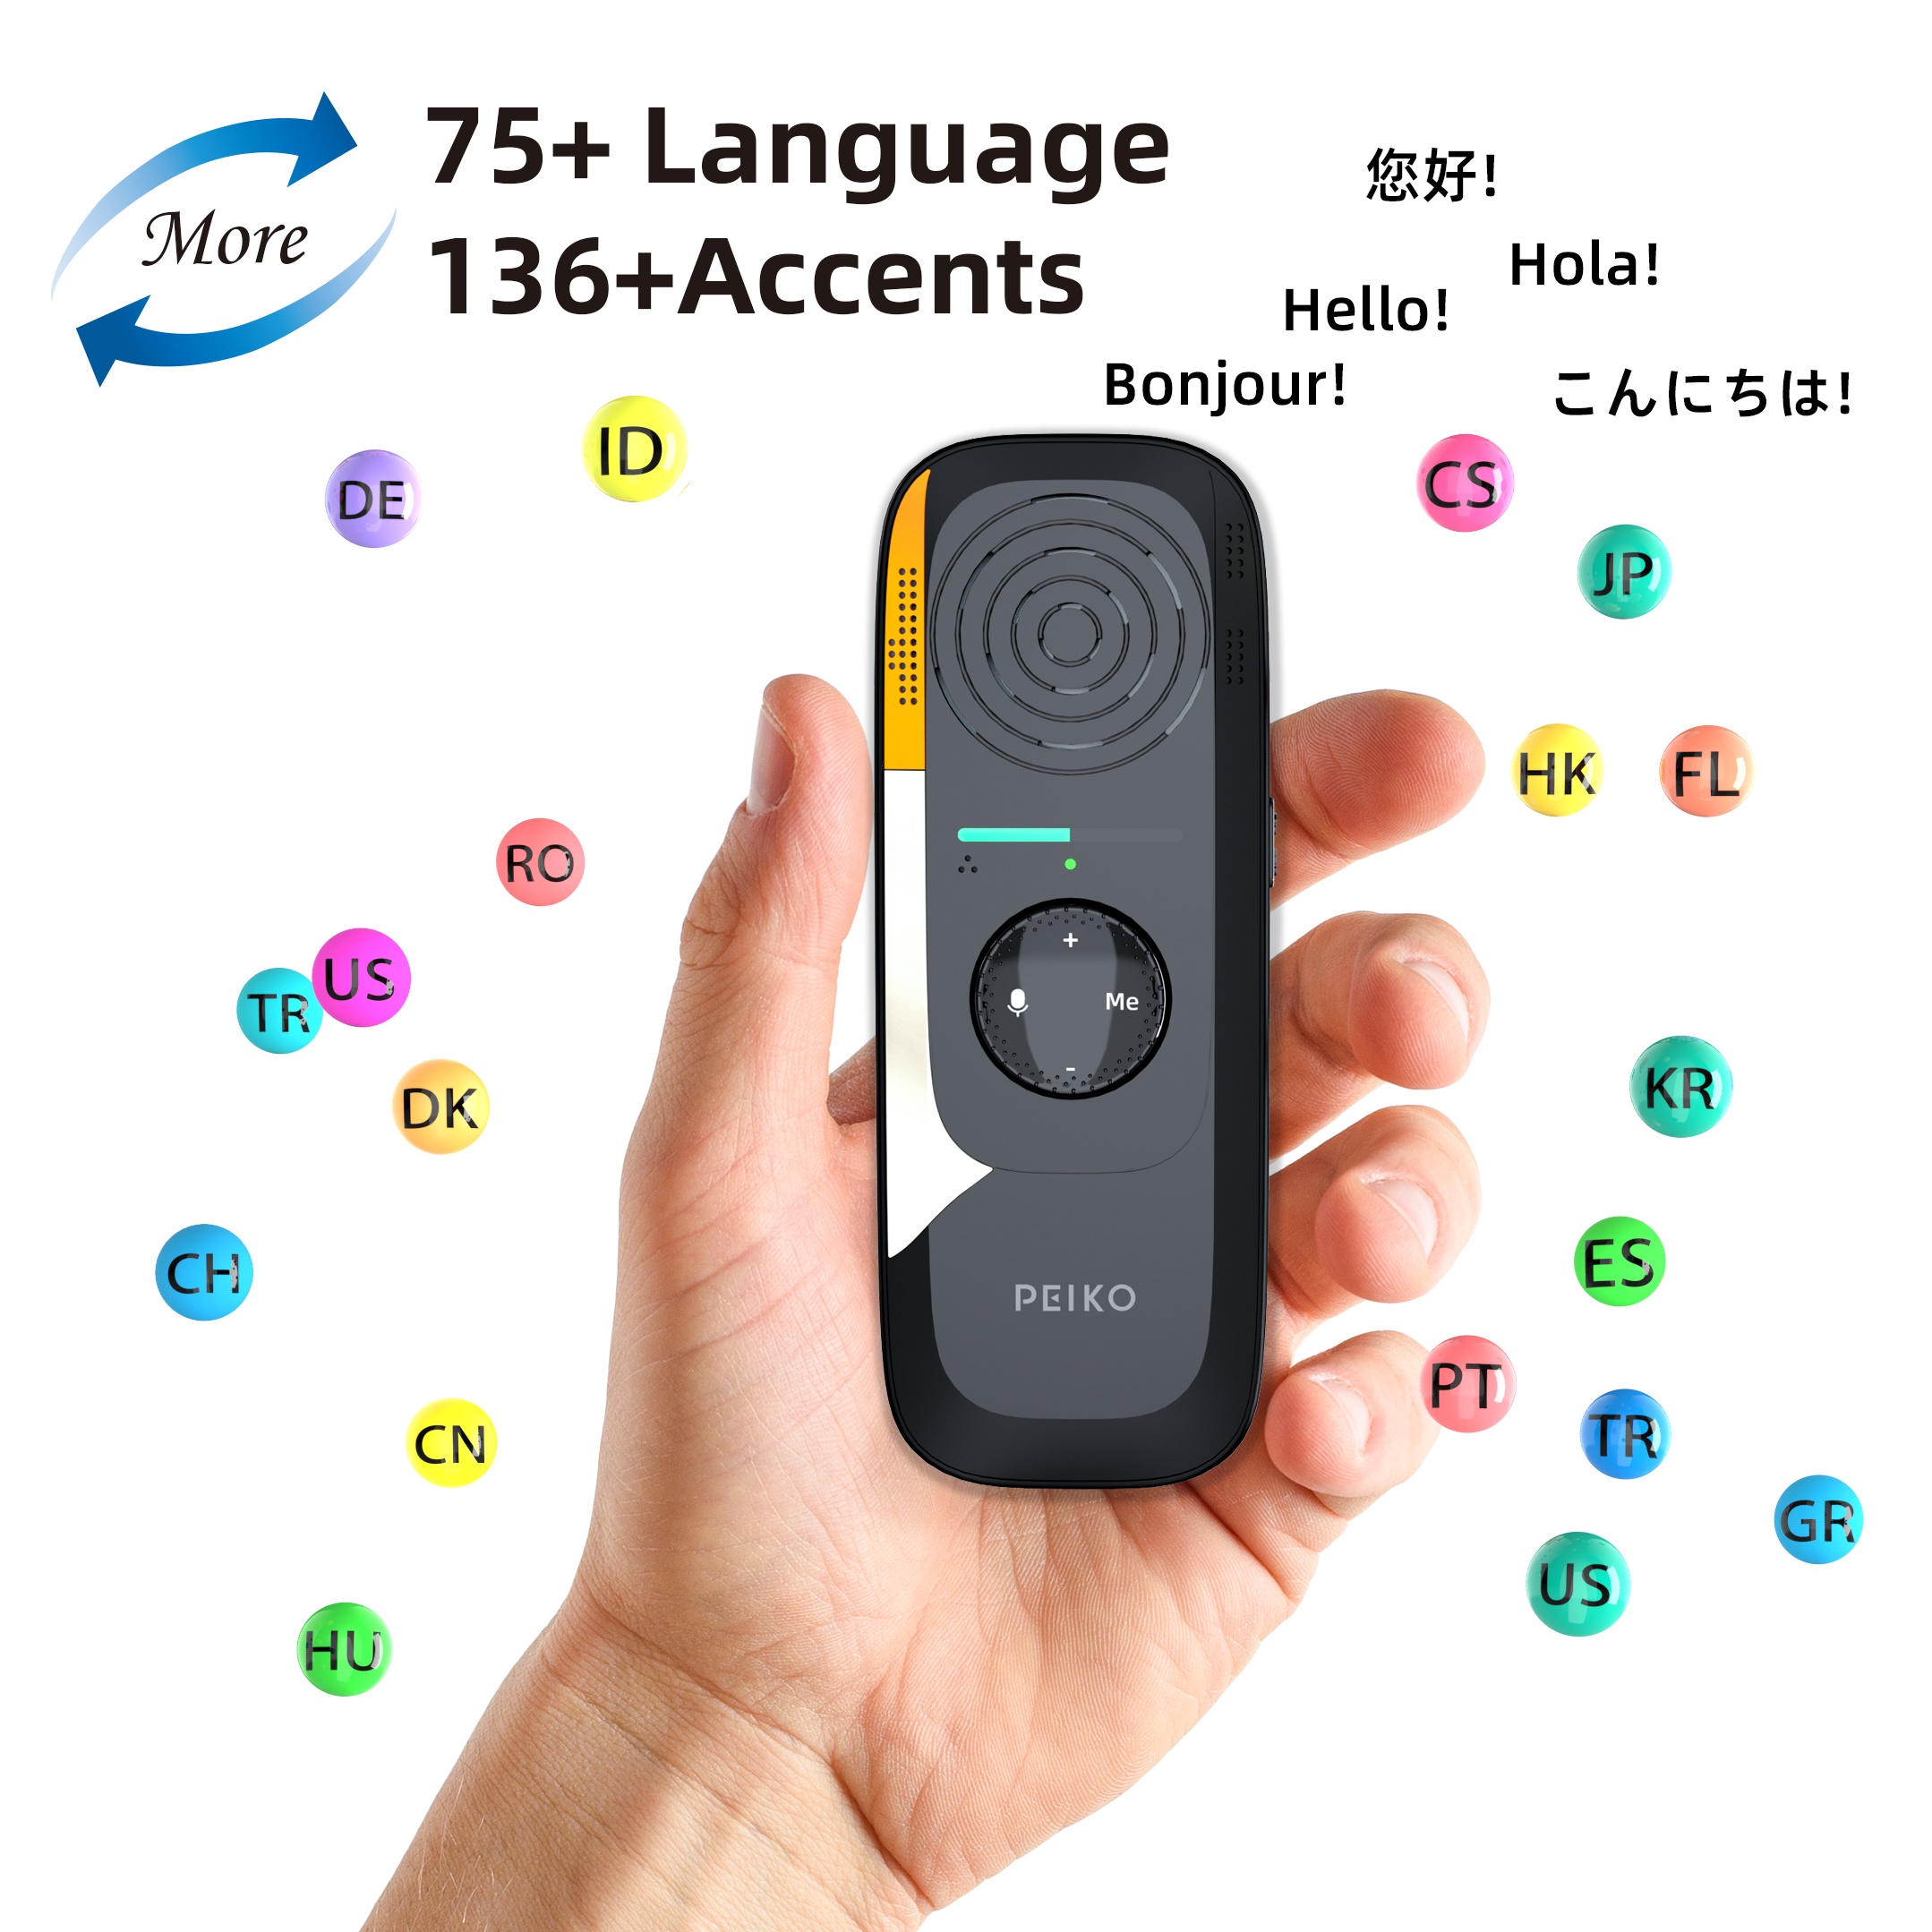 Ultra-Portable Instant Voice Translator Device - Seamless Two-Way Translation for 75 Languages $30.46